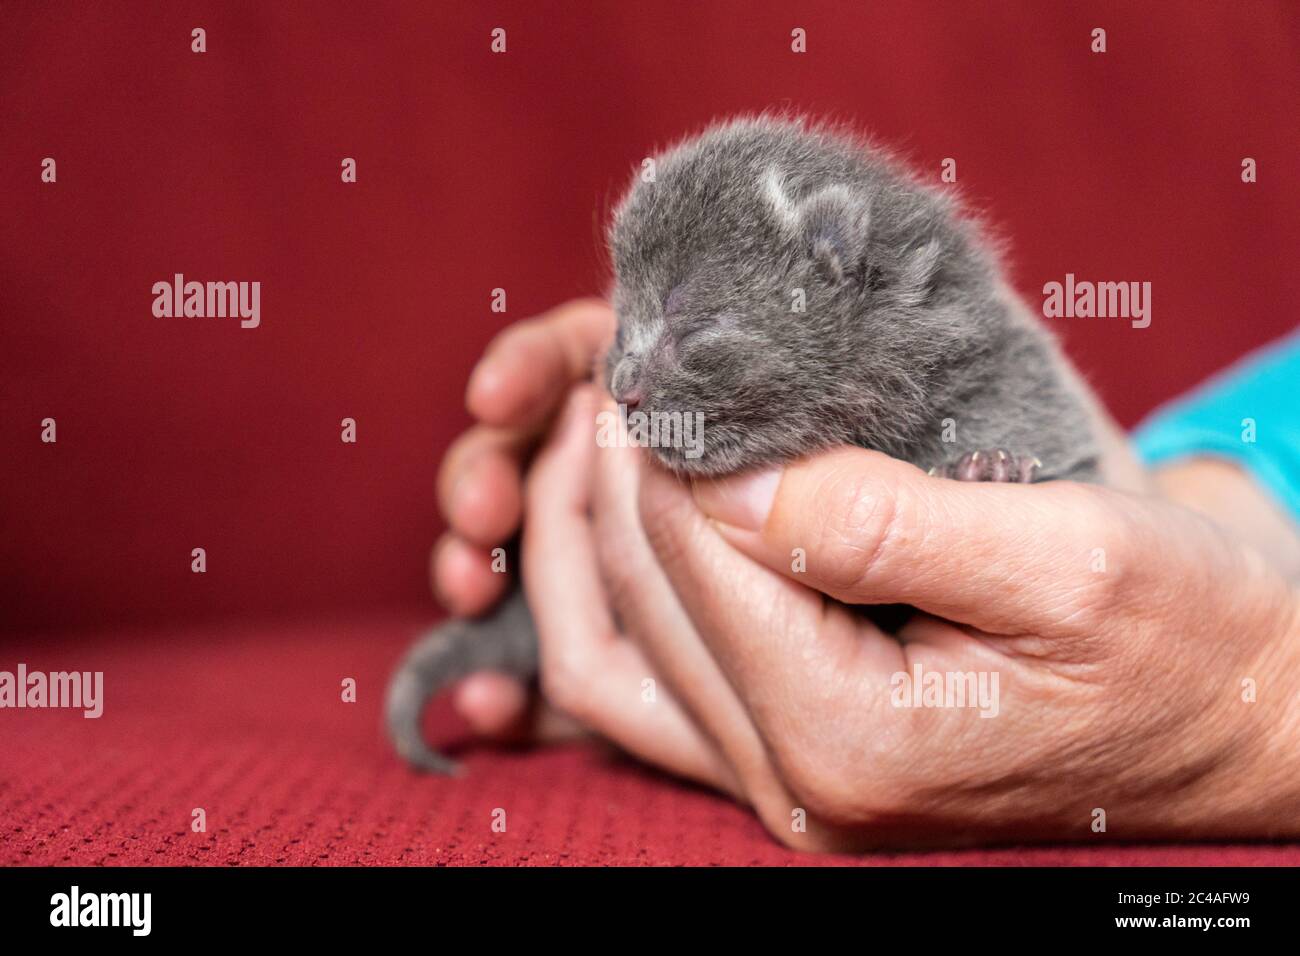 British Shorthair kitten, one or two weeks old, being held in hand with a red back ground Stock Photo